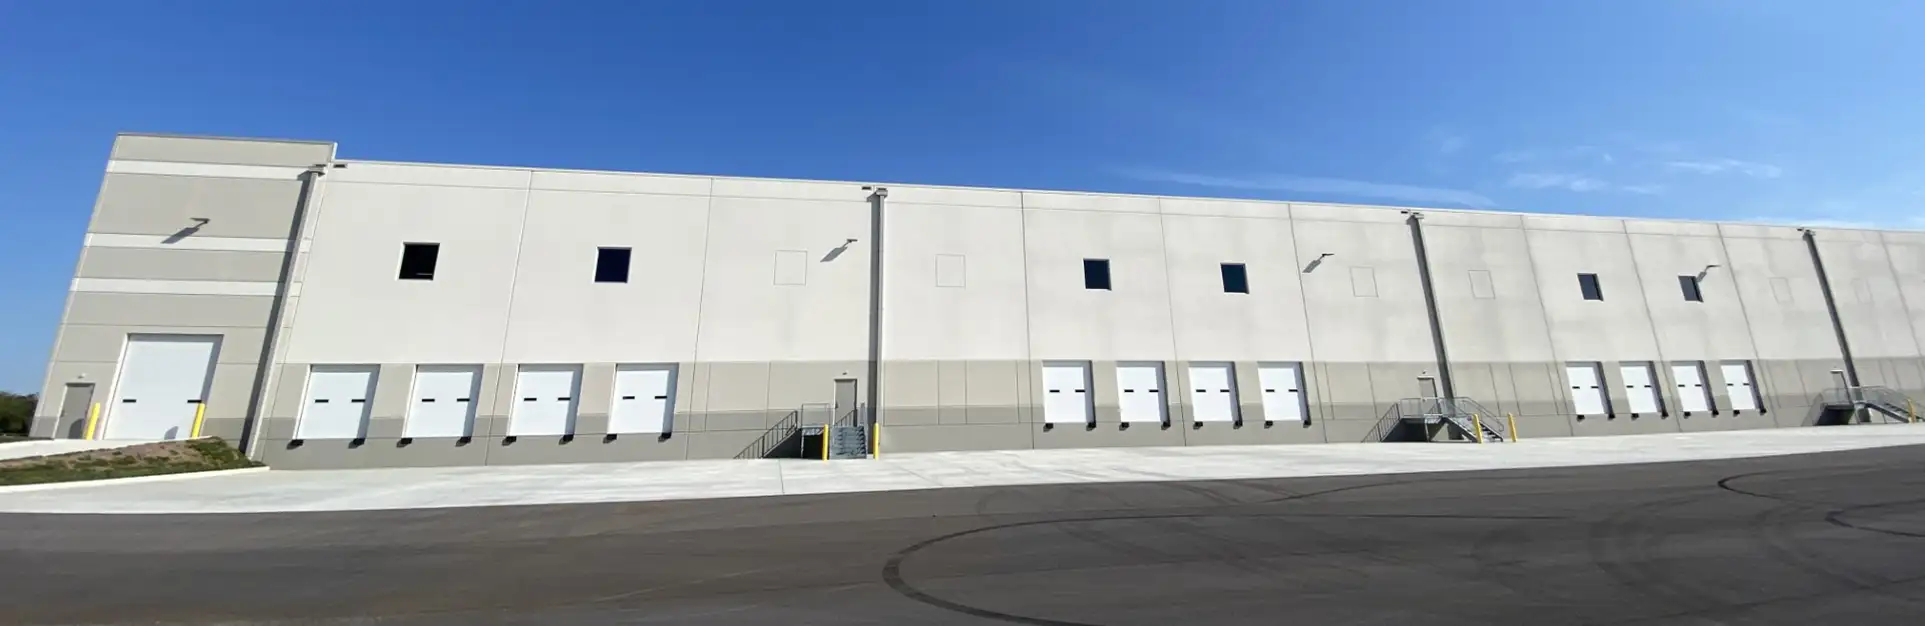 eCommerce fulfillment center Hagerstown